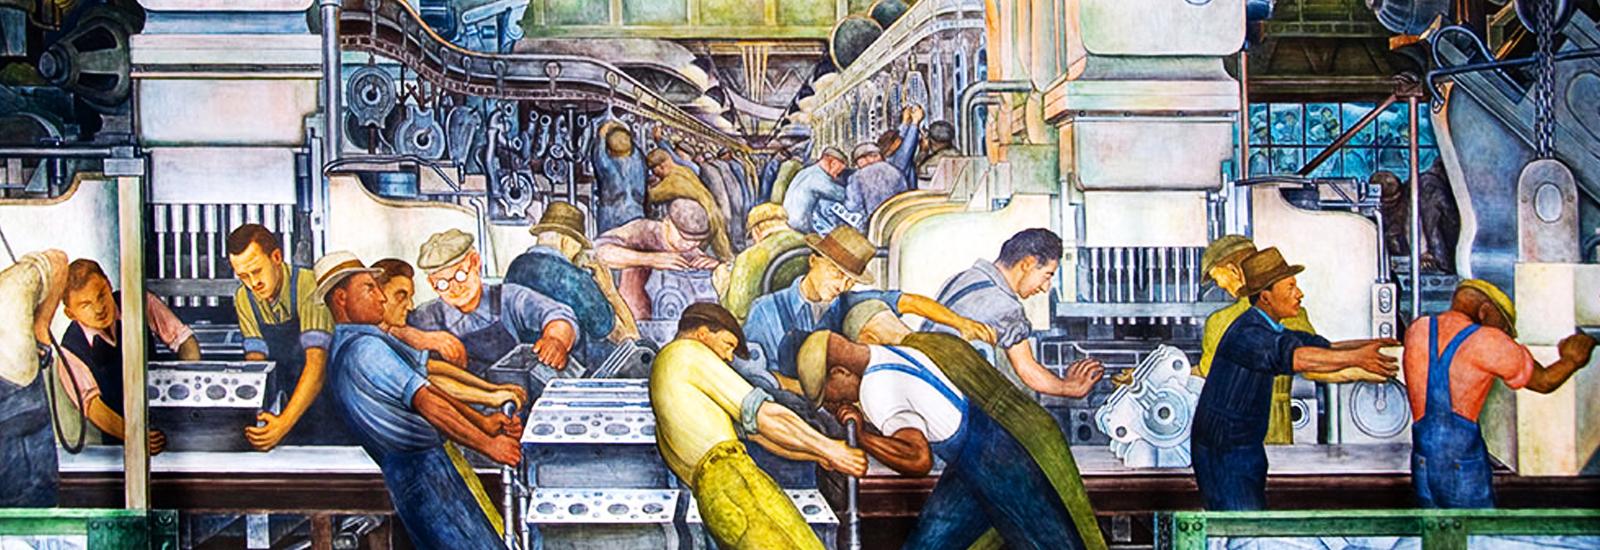 Detroit Industry Mural by Diego Rivera